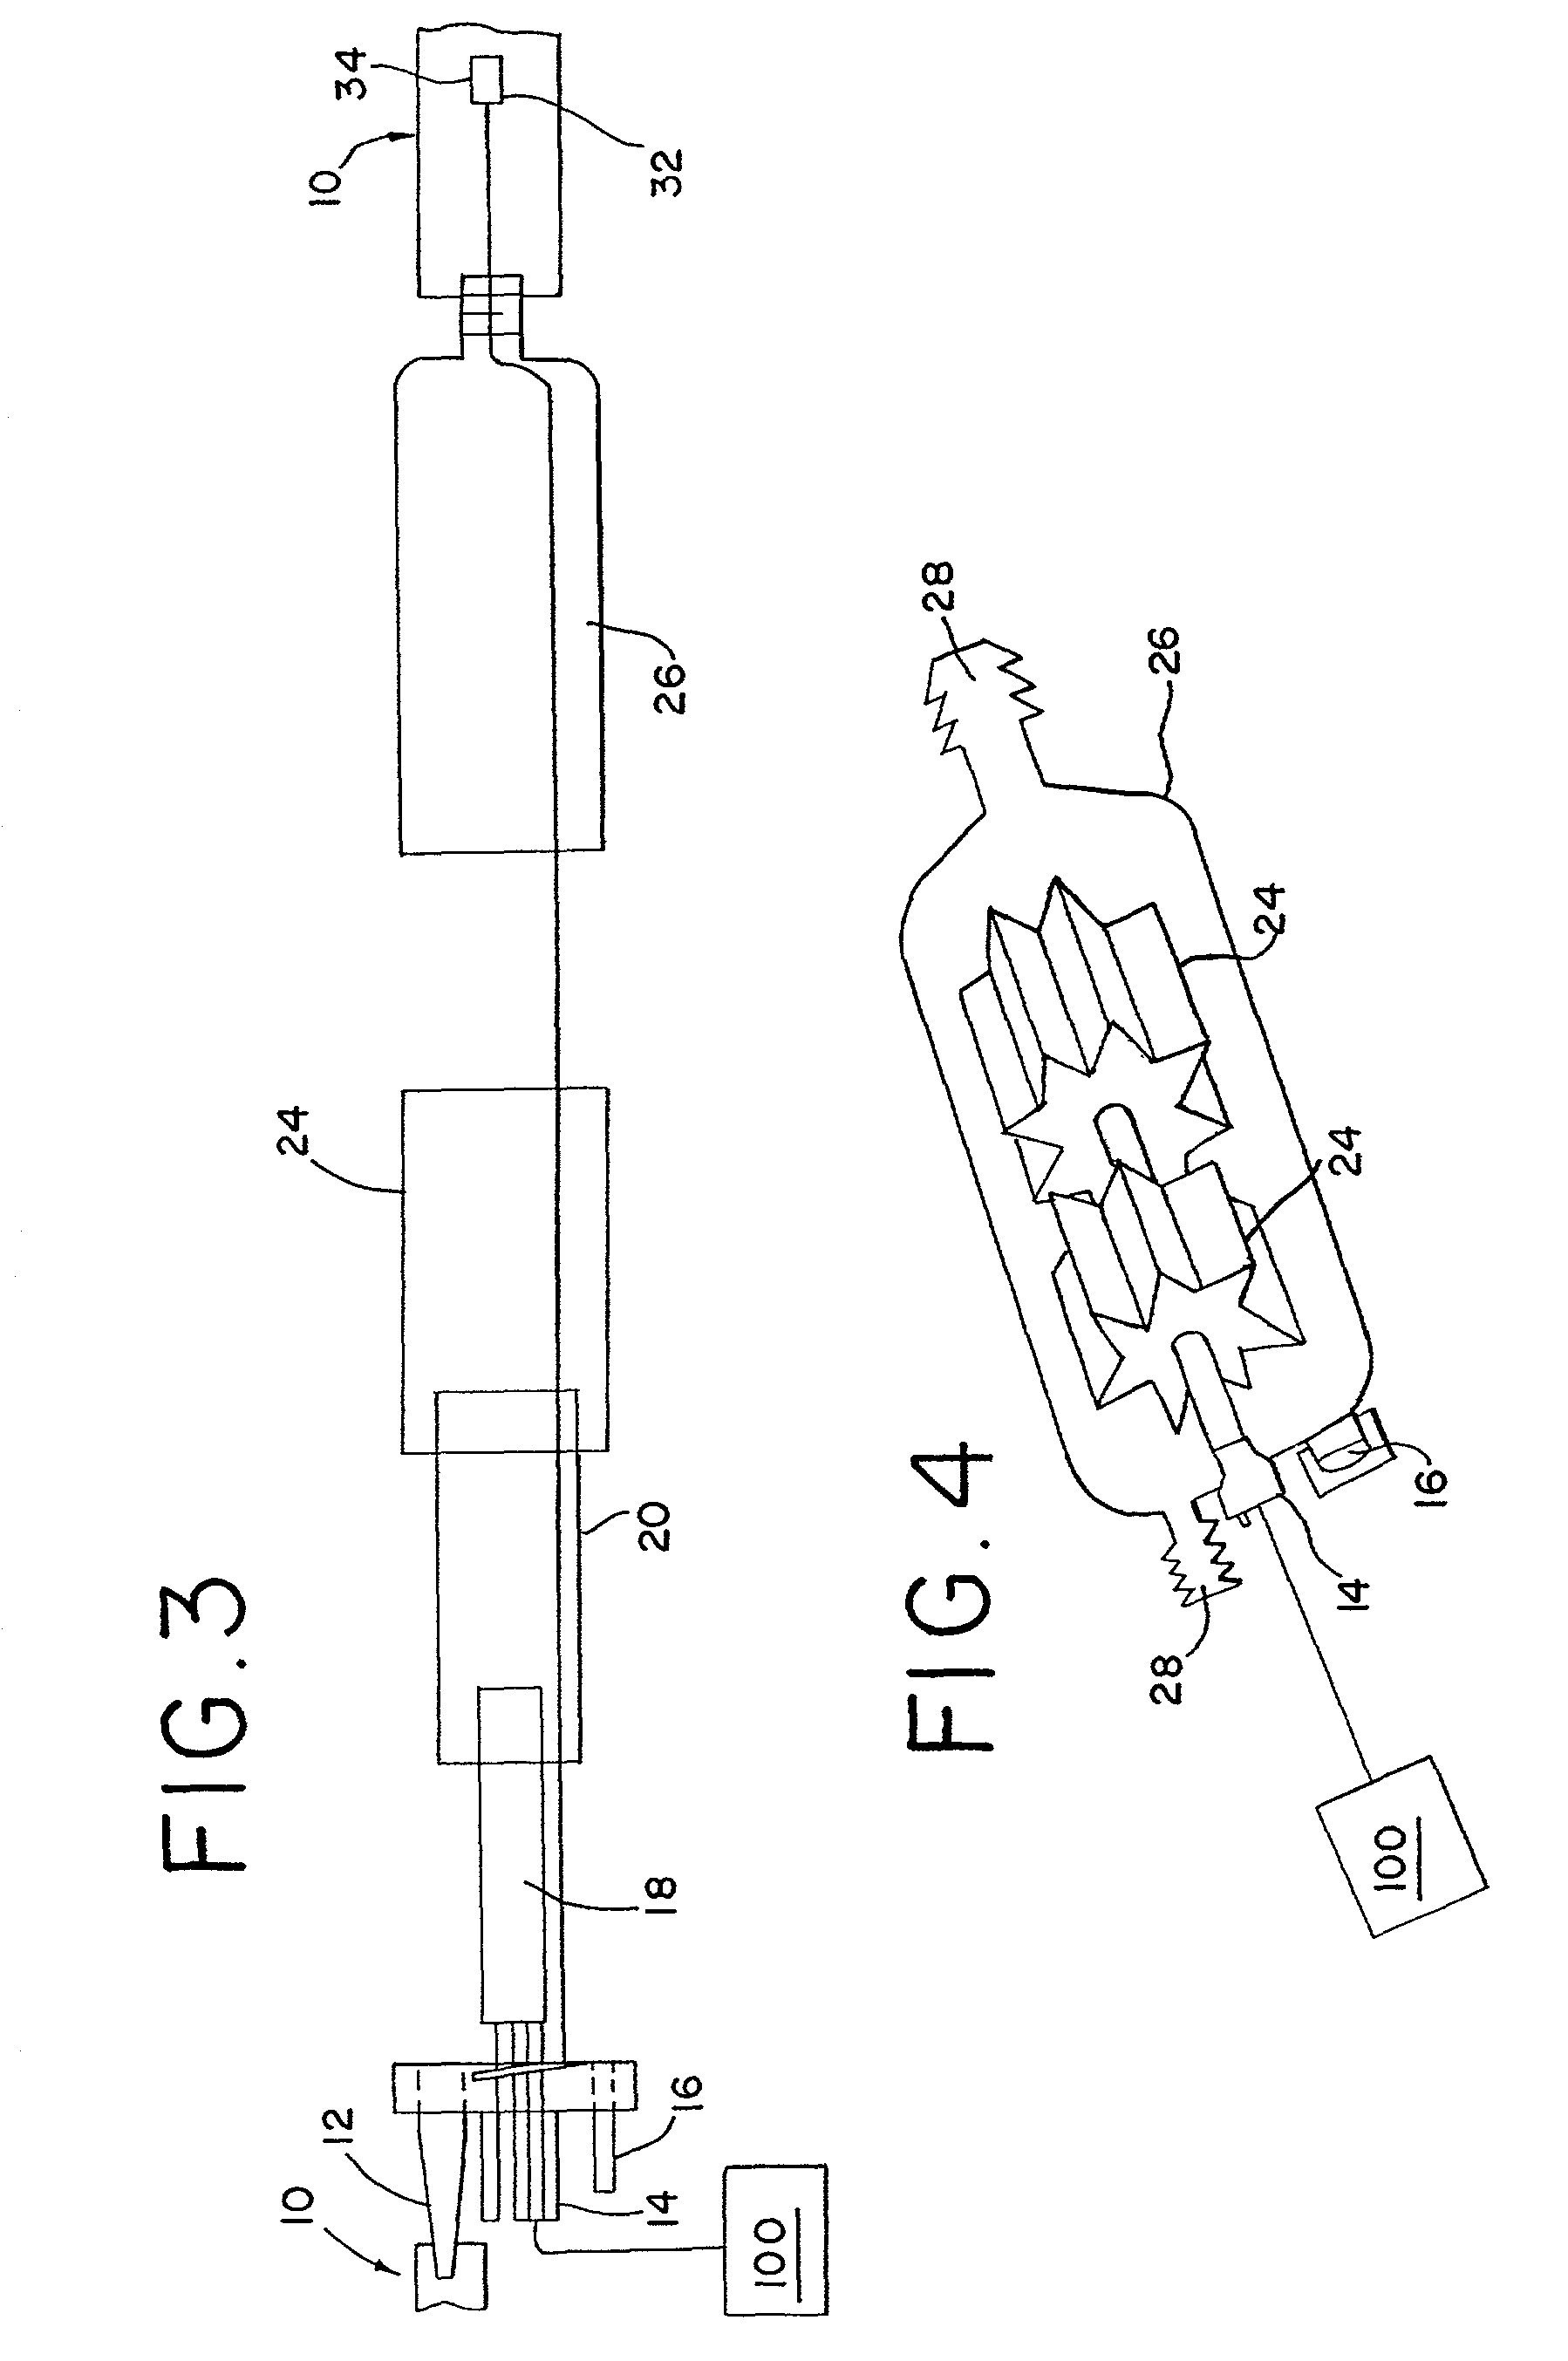 Method and apparatus for humidification and warming of air